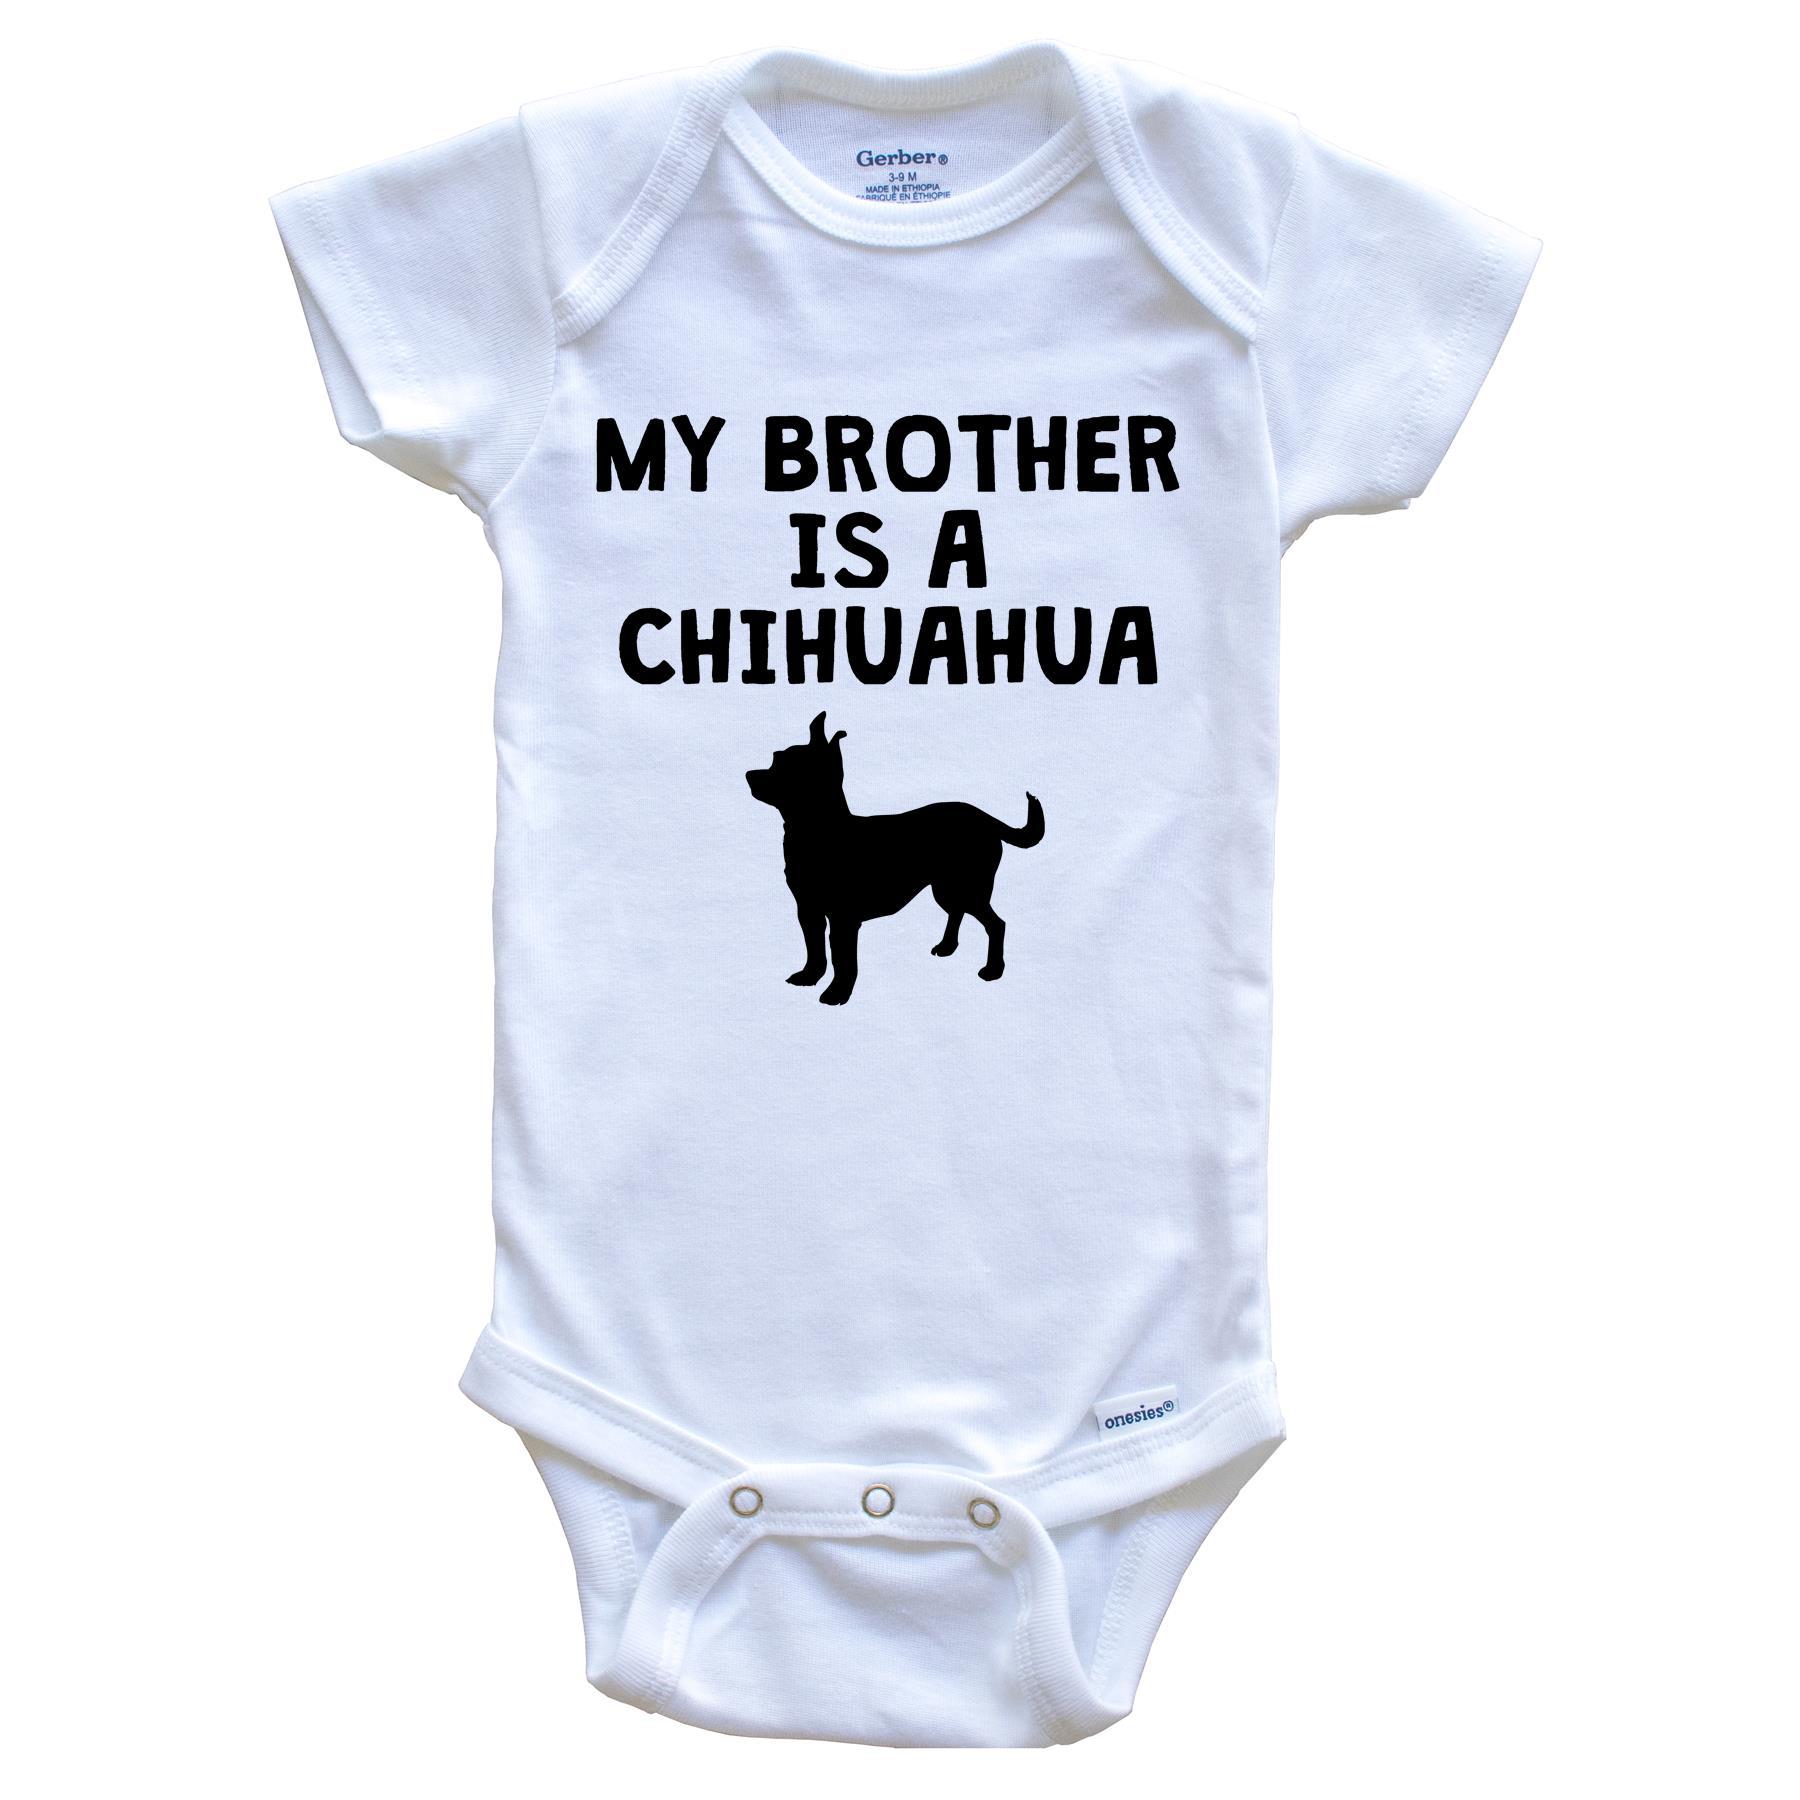 My Brother Is A Chihuahua Baby Onesie